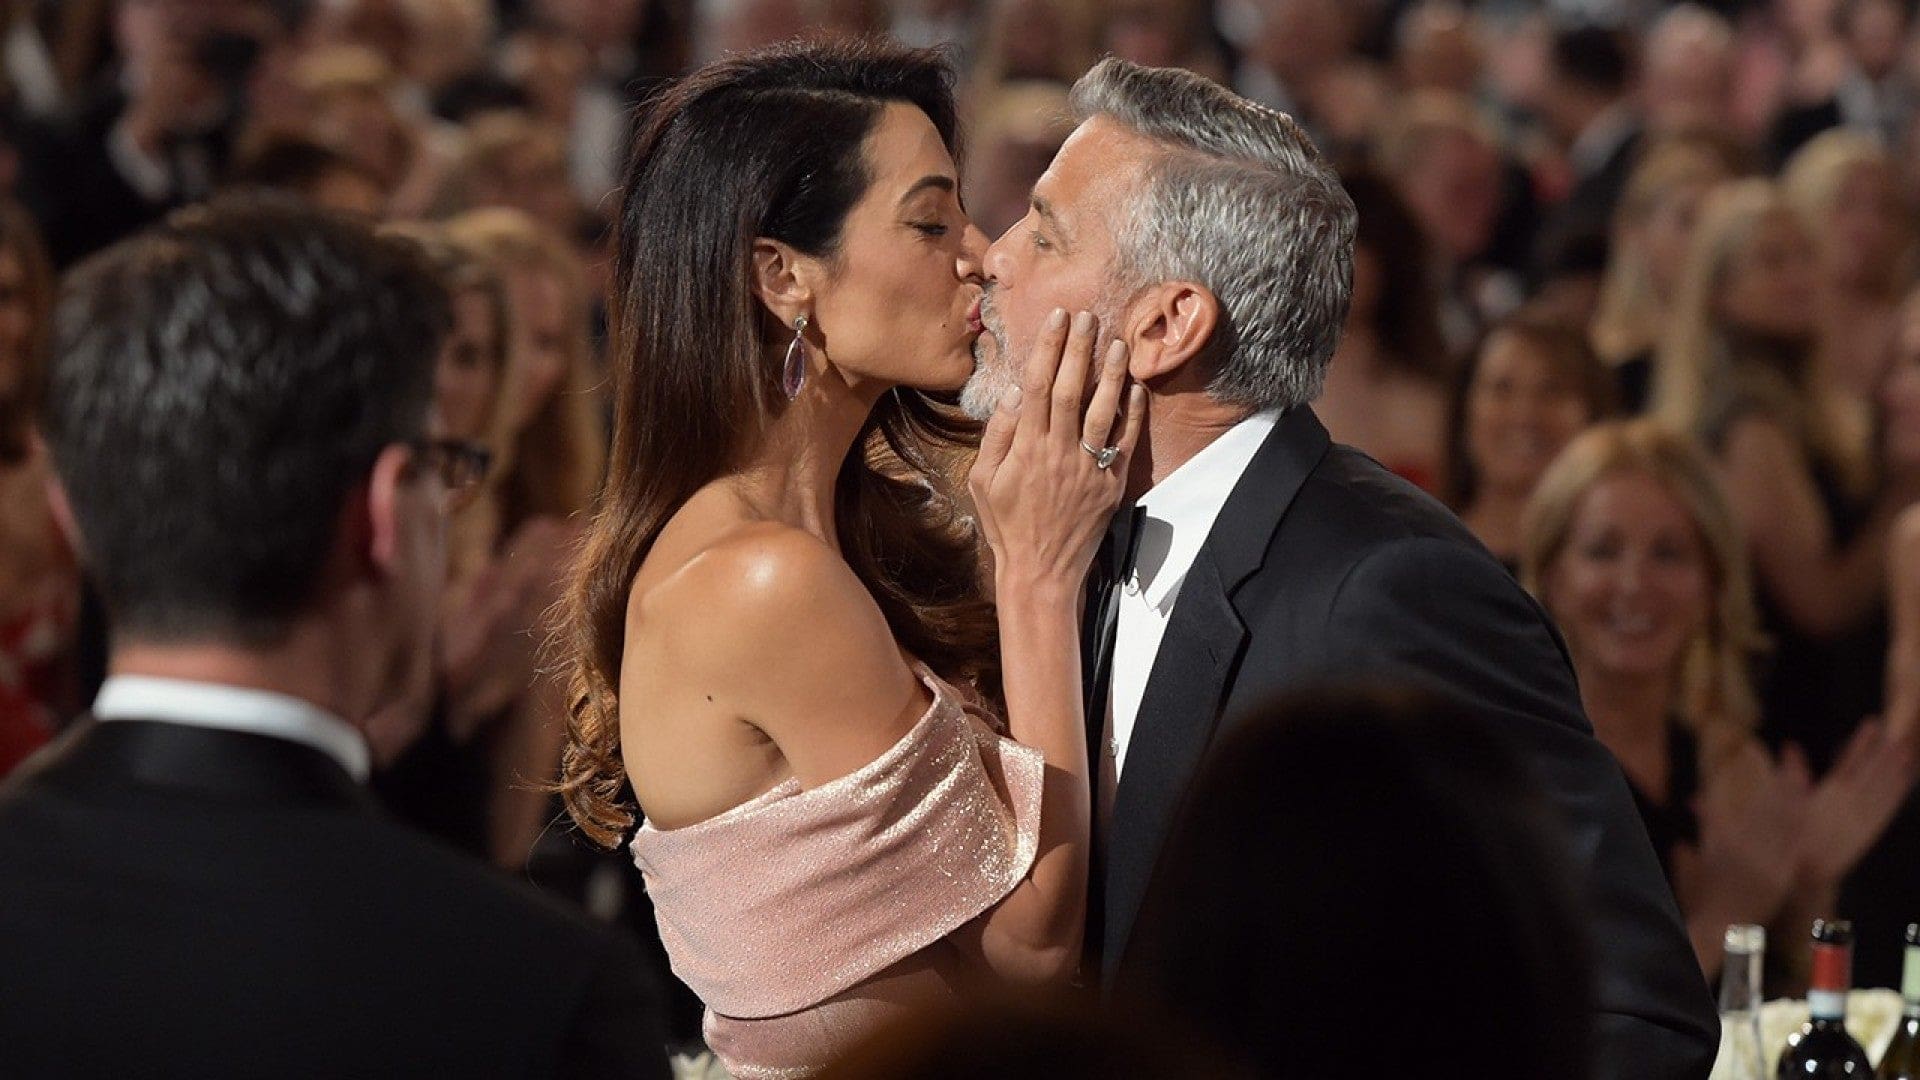 ”george-clooney-shares-romantic-gesture-he-and-amal-like-to-do-to-keep-the-flame-alive-7-years-into-their-relationship”